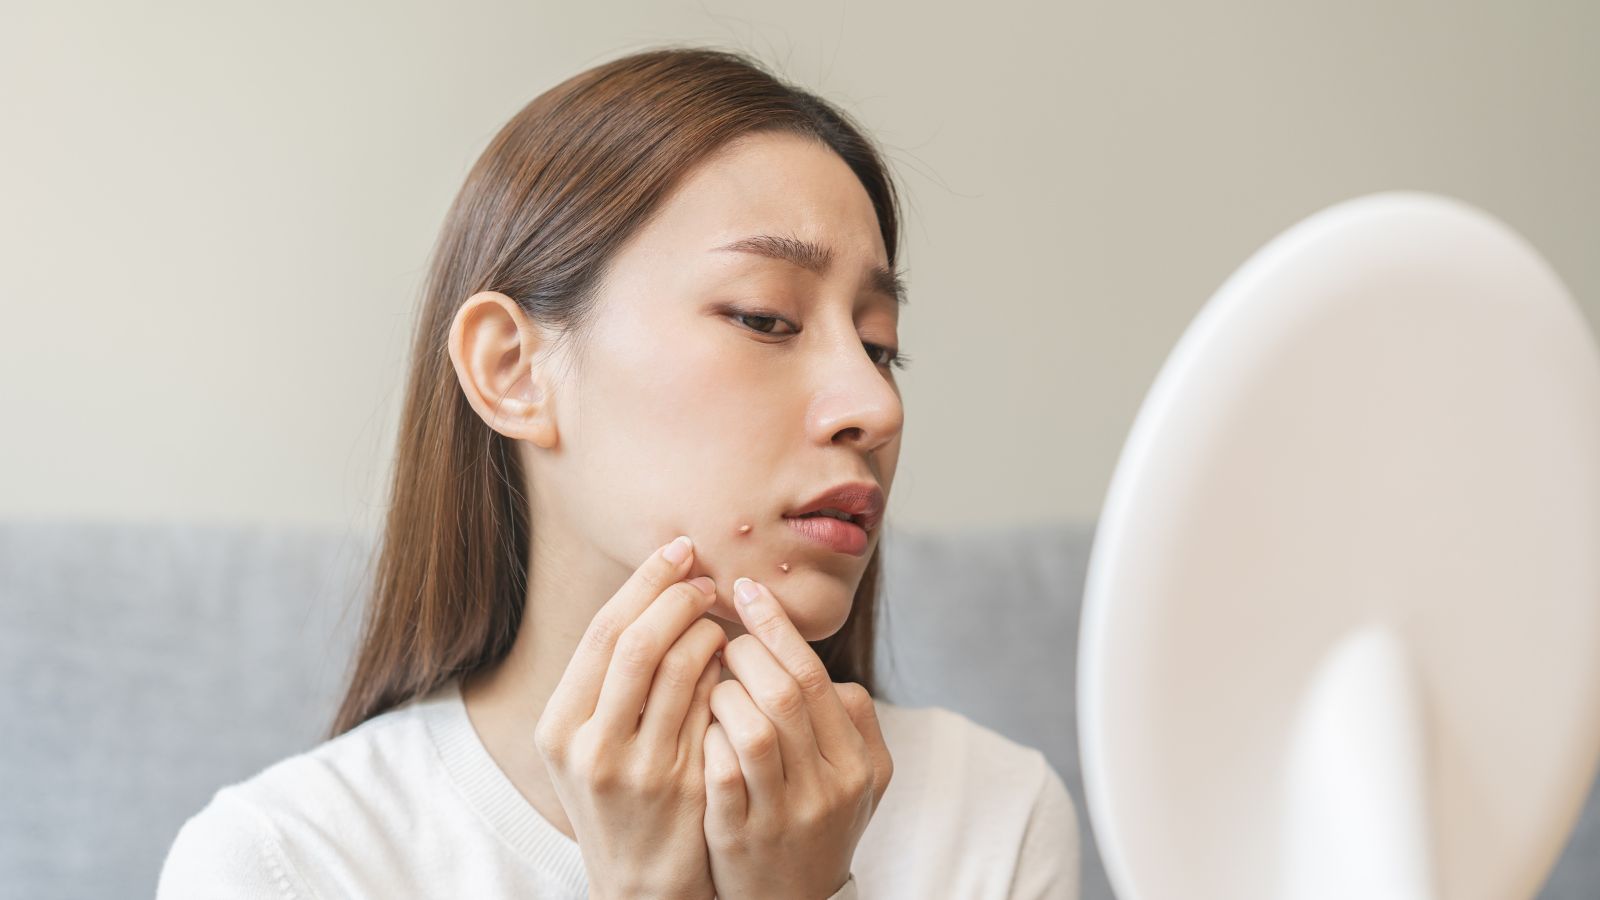 An Asian woman expresses concern as she touches acne around her chin and mouth, contemplating squeezing the acne spots on her face.